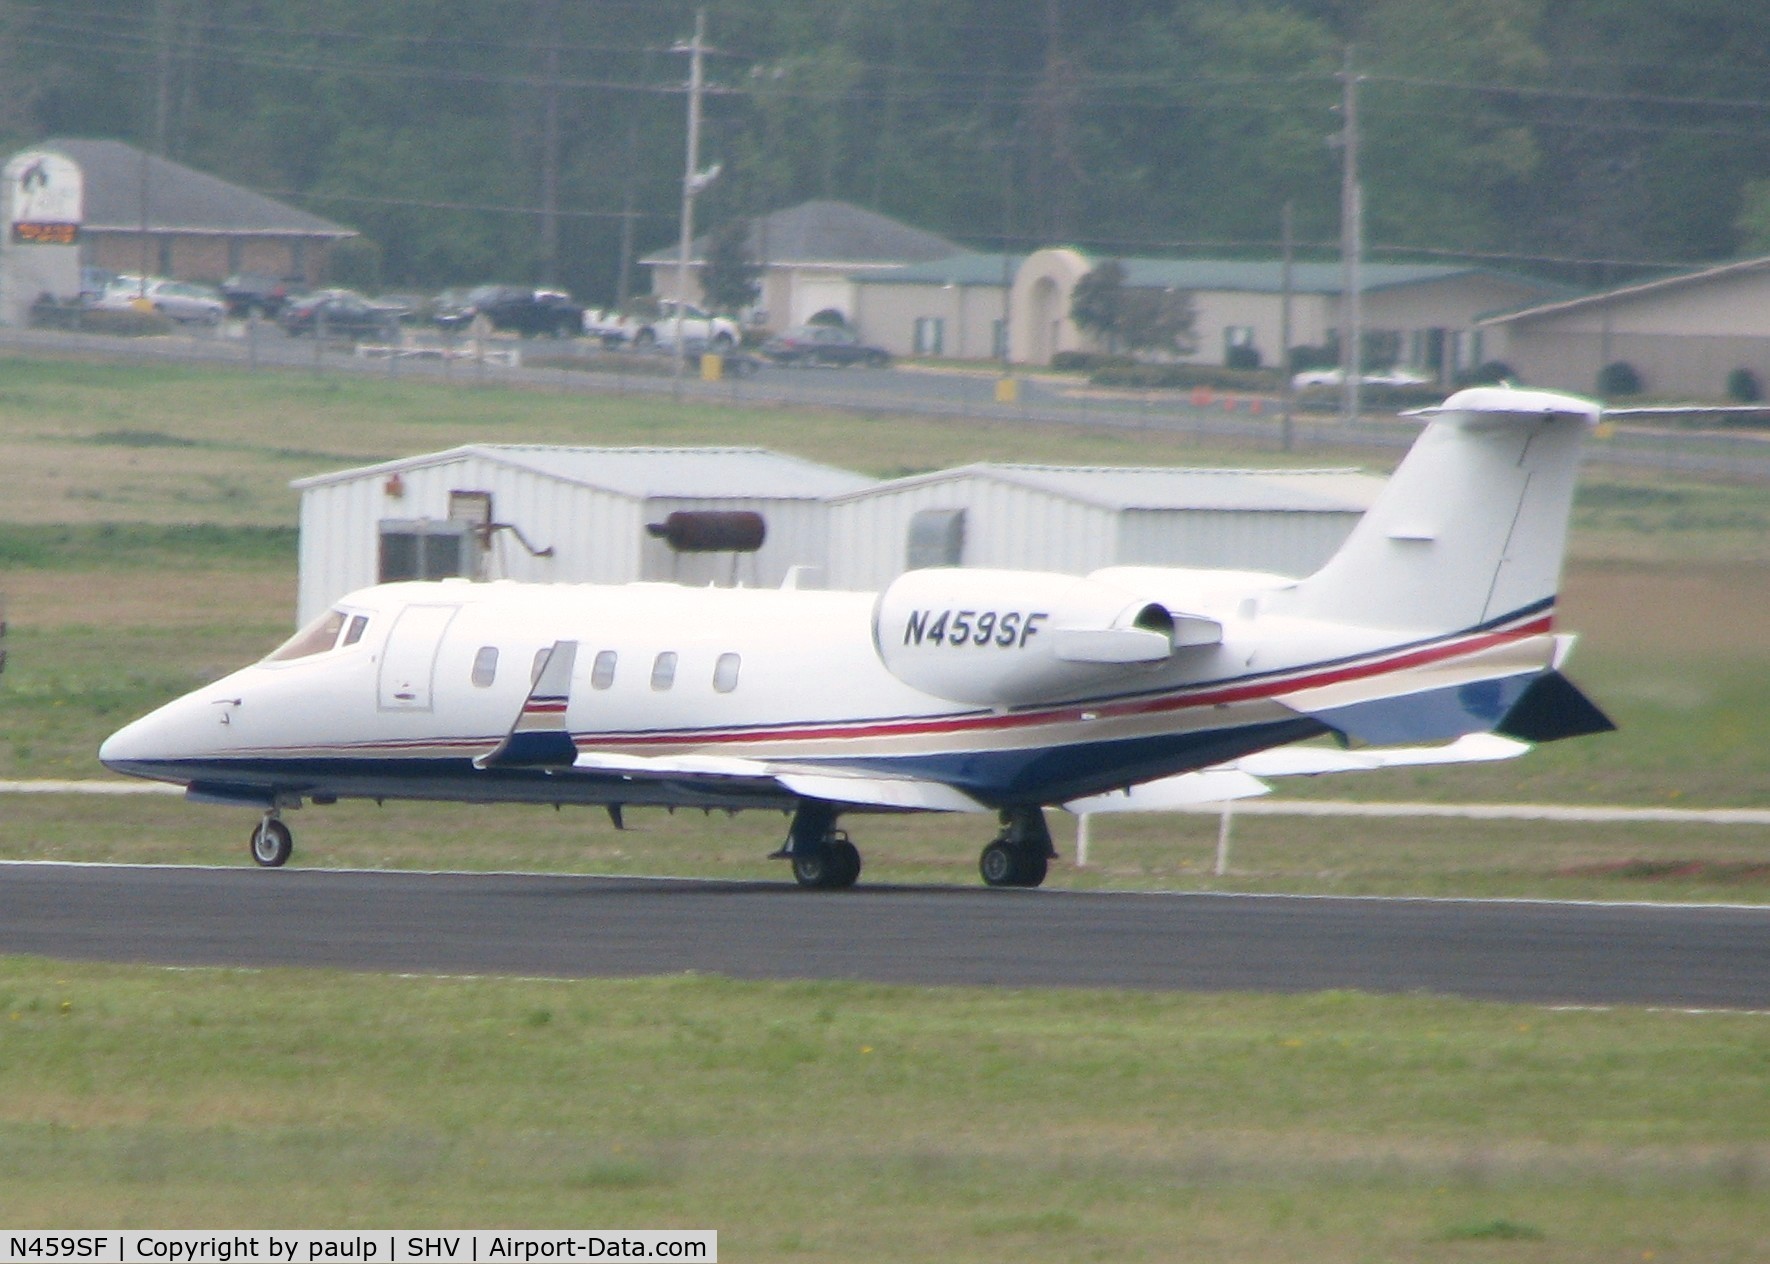 N459SF, 1994 Learjet Inc 60 C/N 049, Starting to roll down 14 for take off from the Shreveport Regional airport.